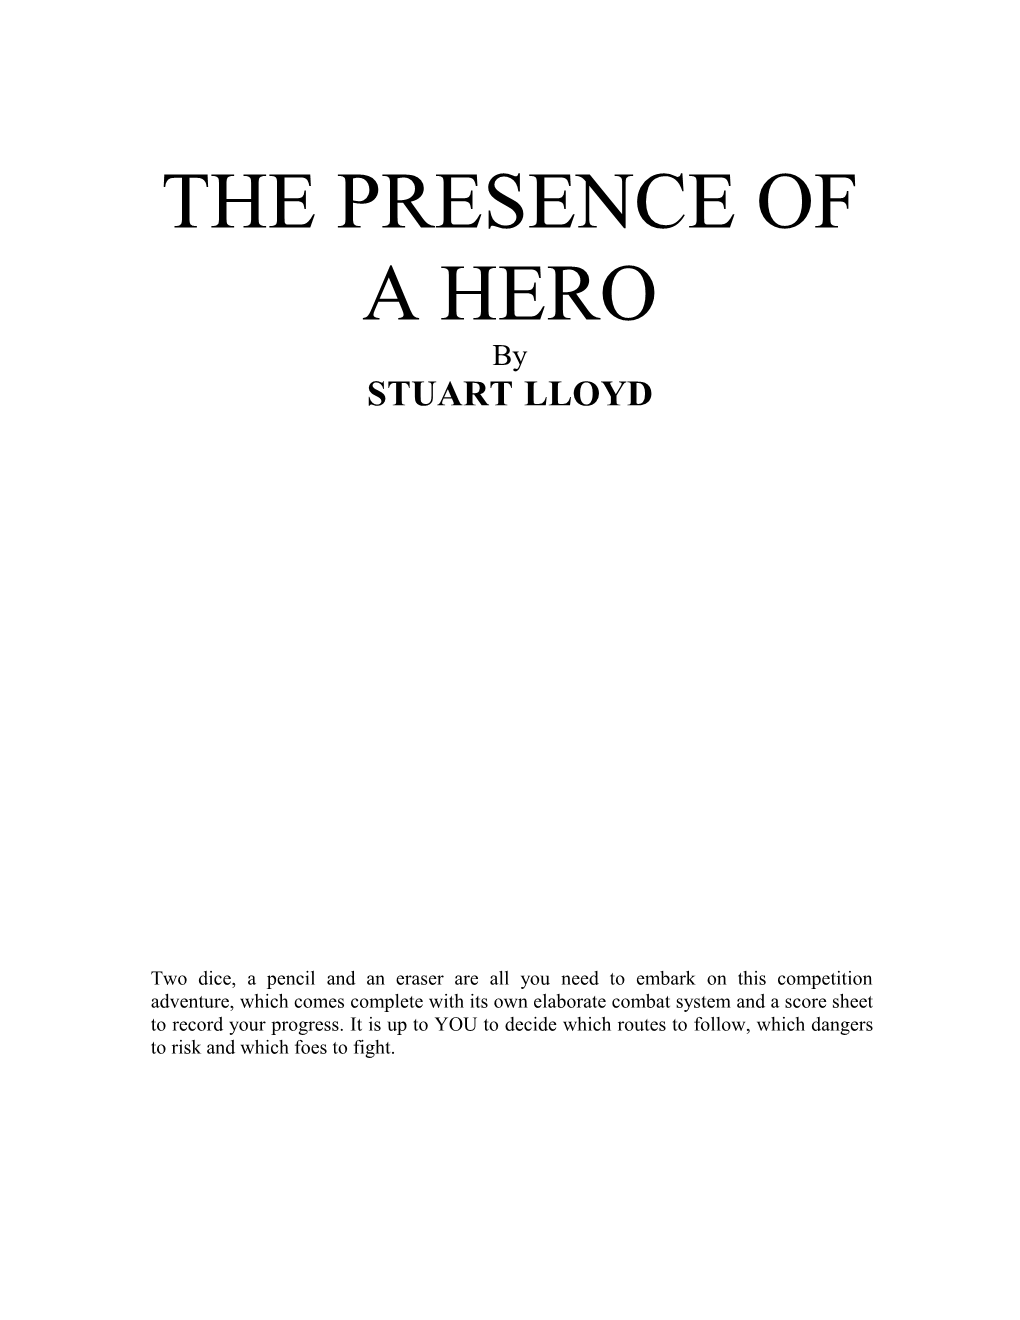 The Presence of a Hero